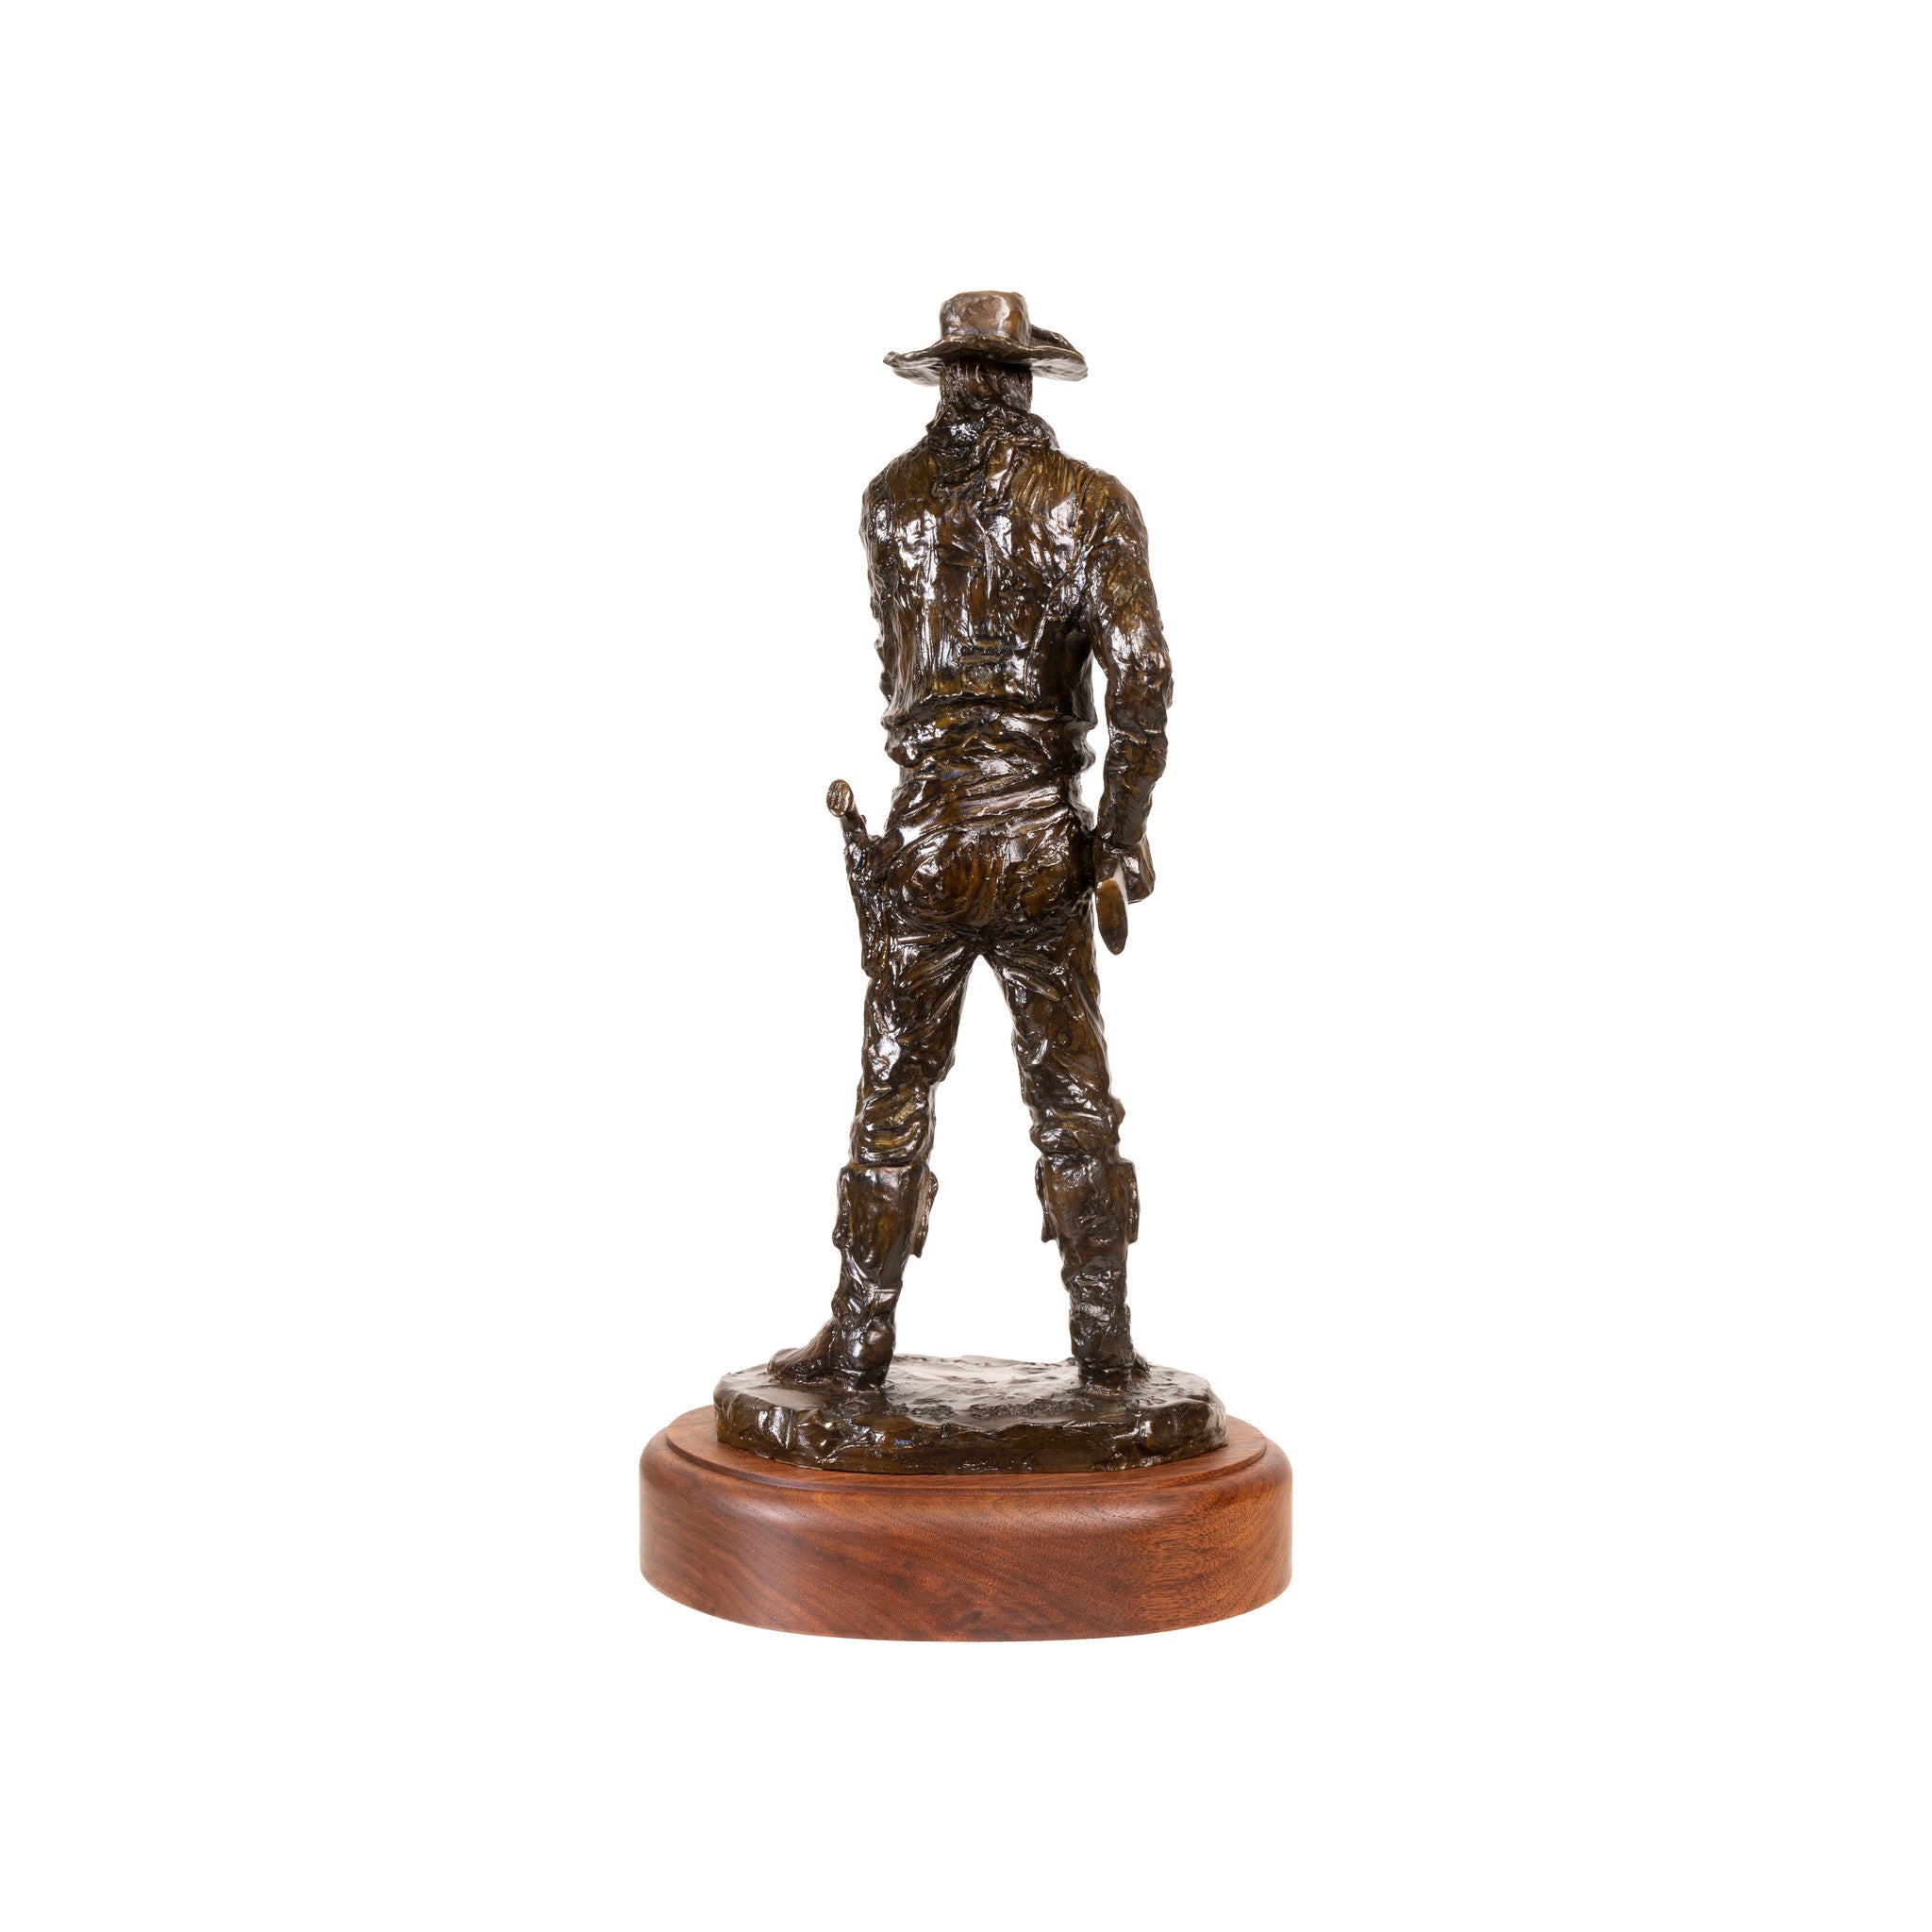 "The Outlaw" Bronze by Robert Scriver